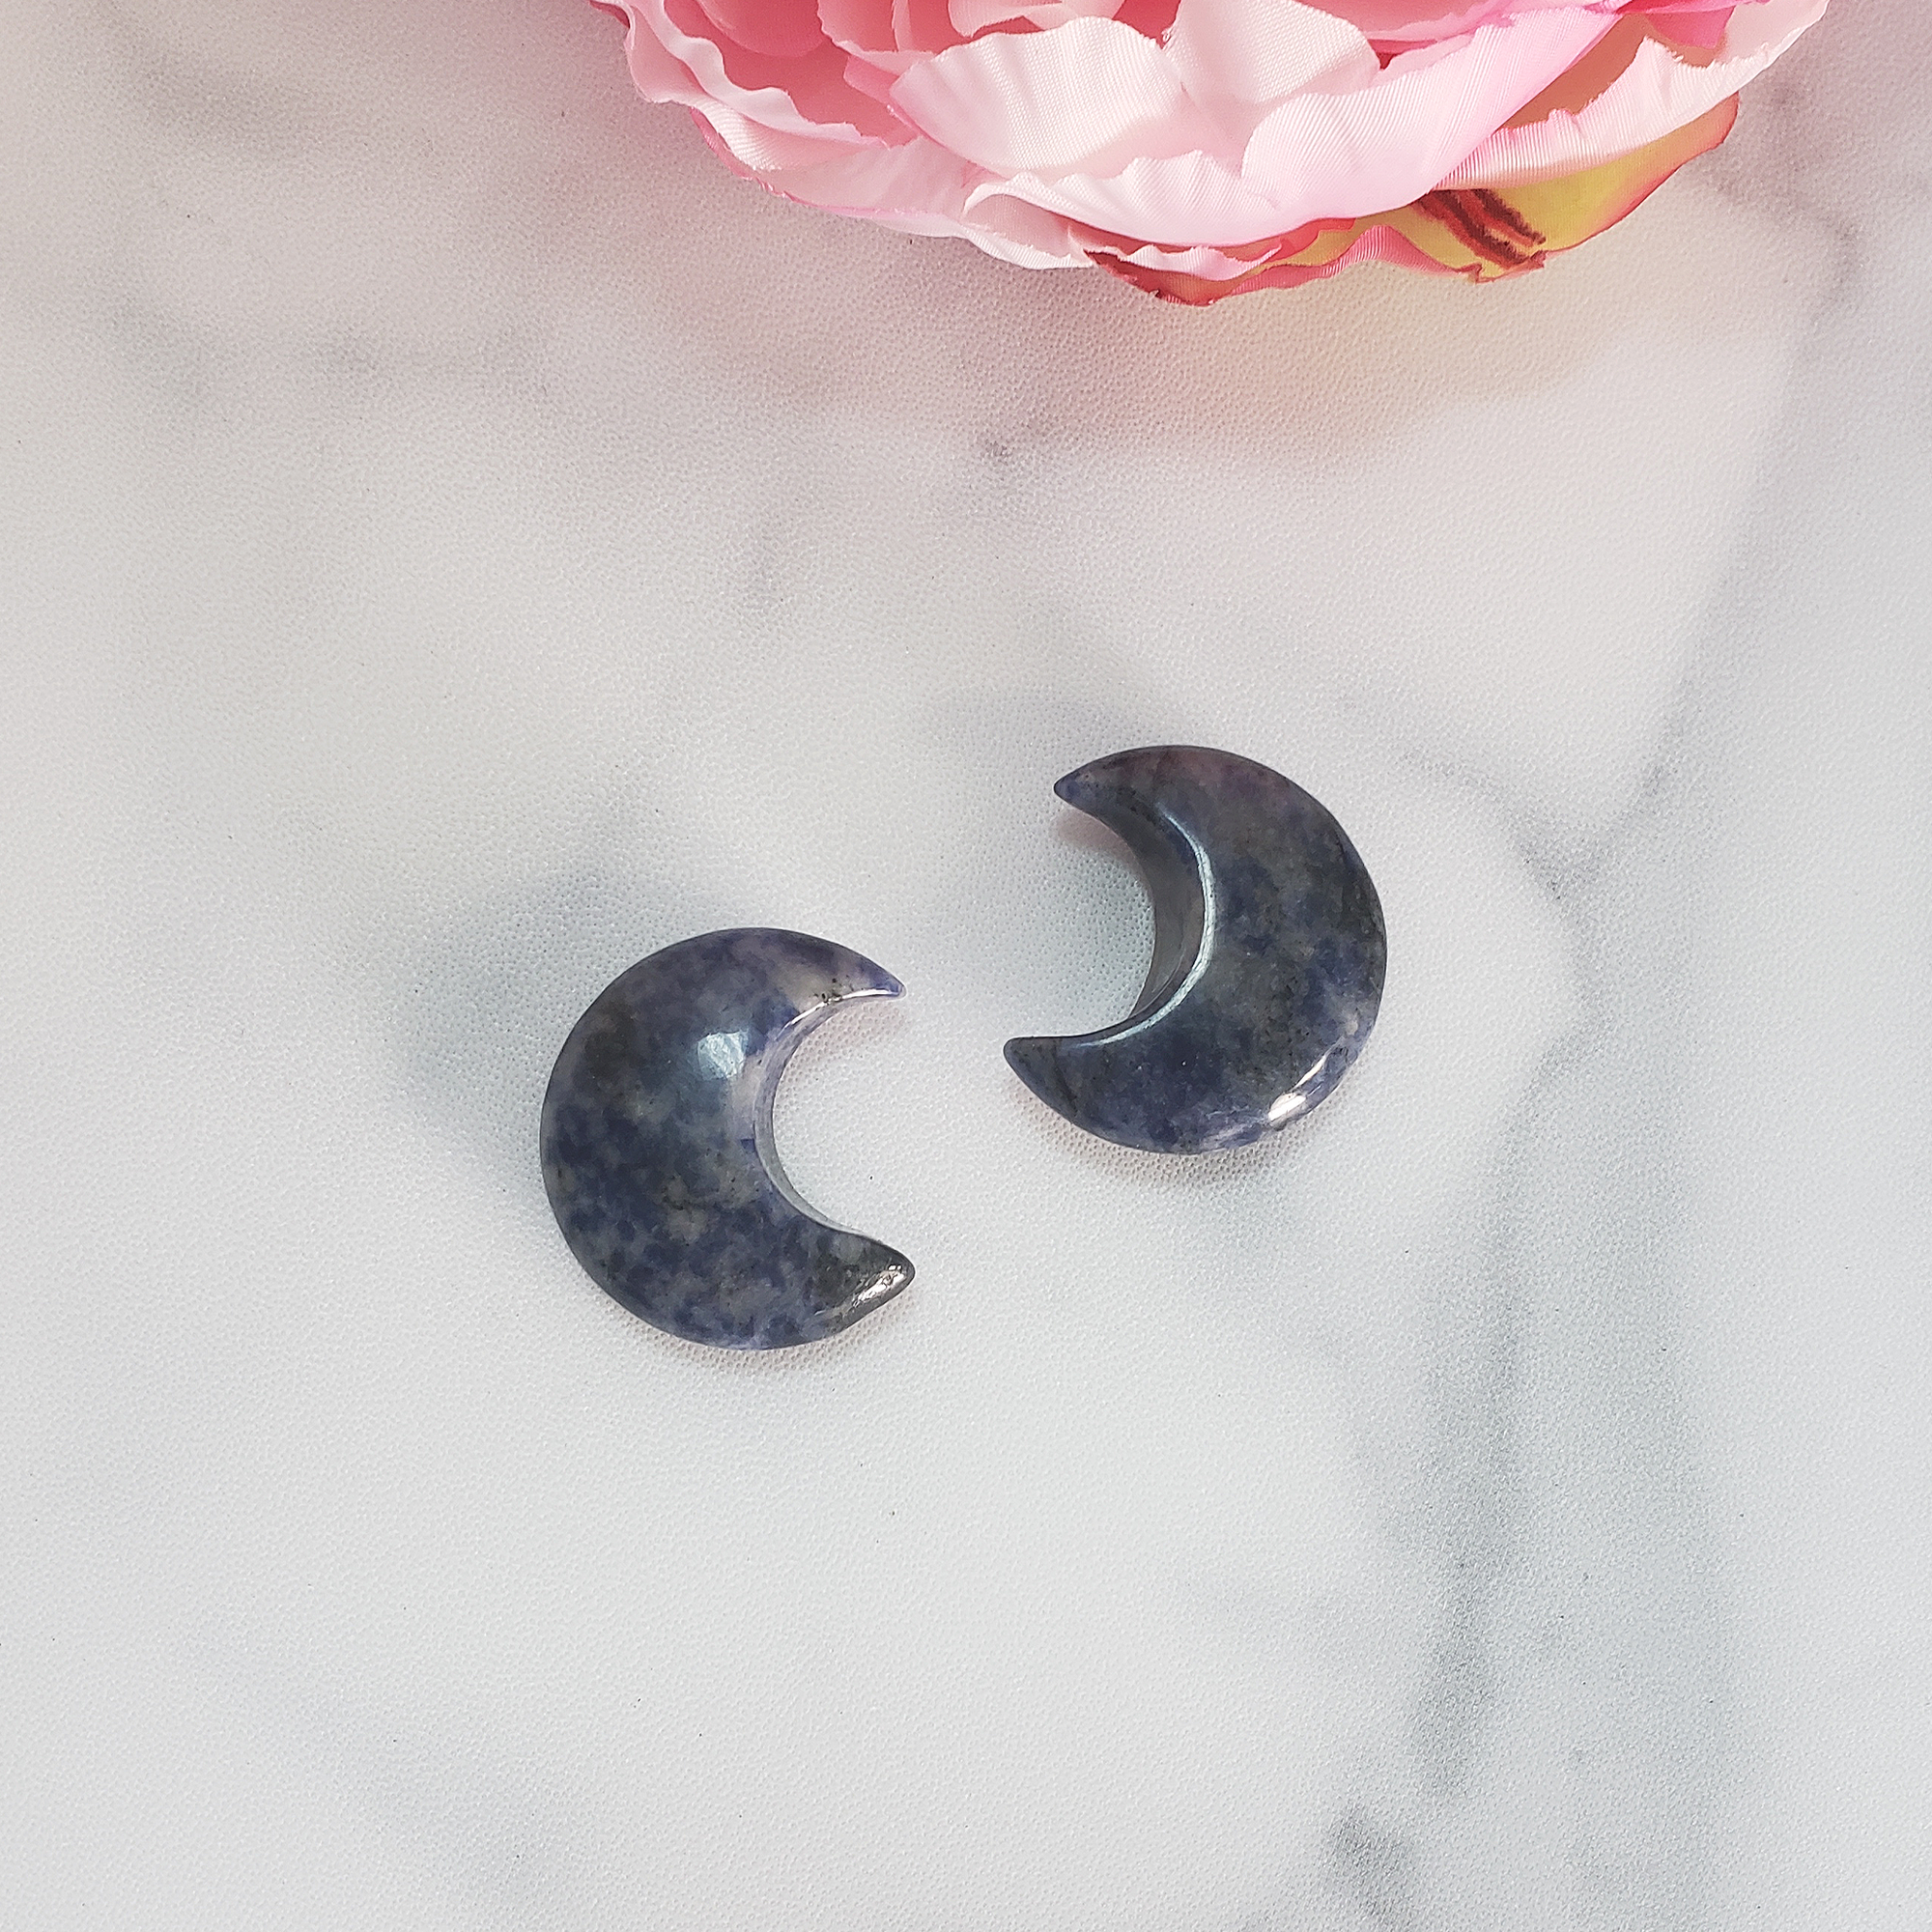 Sodalite Crystal Natural Gemstone Crescent Moon Carving Fidget Stone - Blue Sodalite Crystals